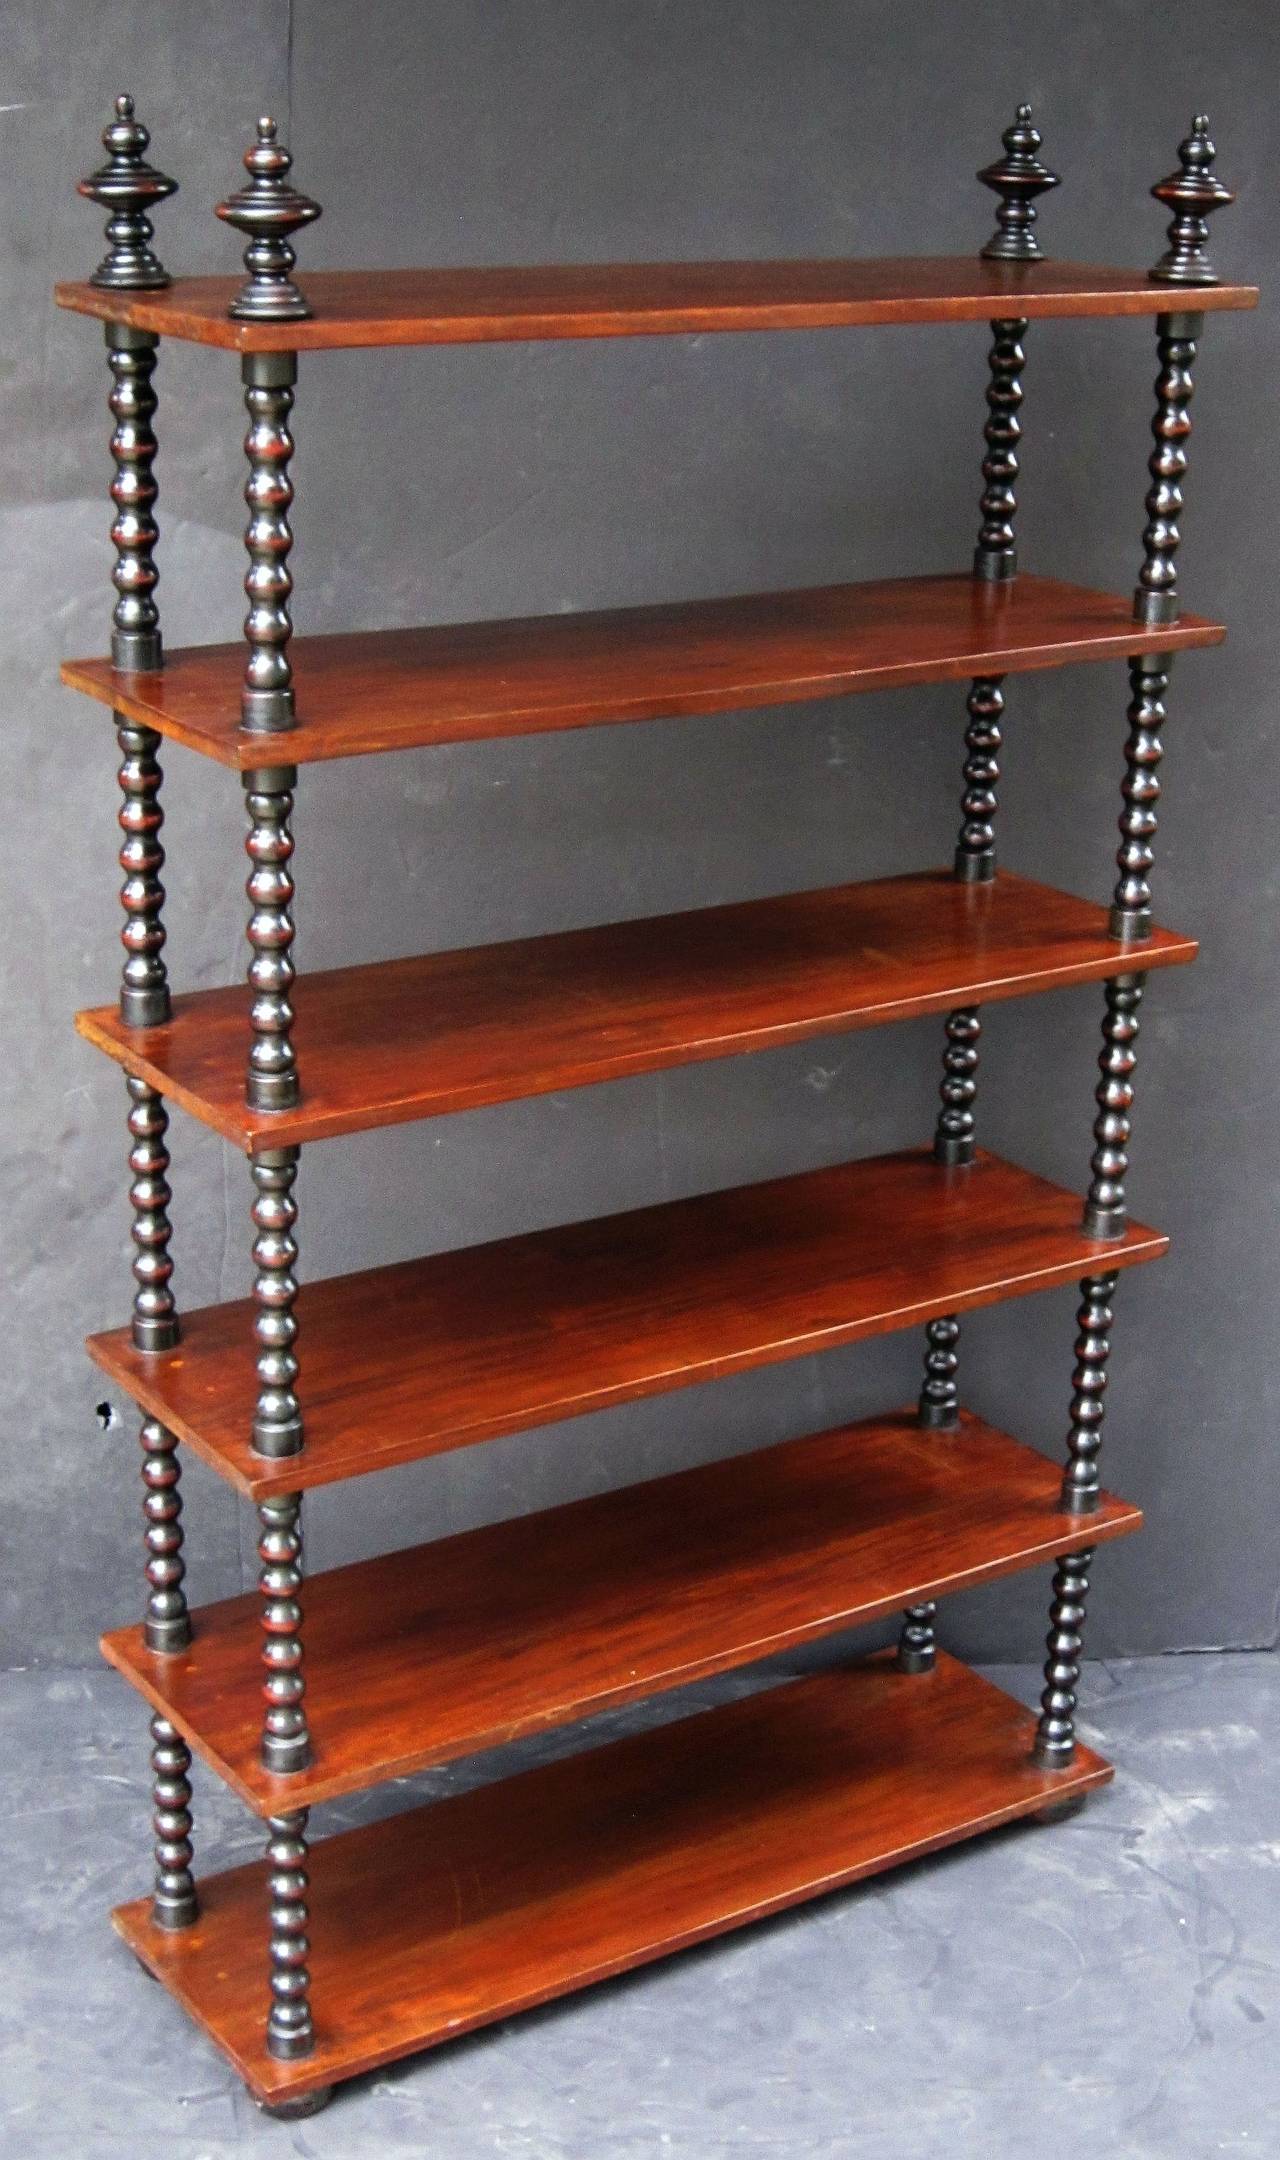 A handsome large English bobbin-turned shelving unit or shelves of mahogany, featuring six rectangular shelves attached to four bobbin-turned supports, with finial tops.